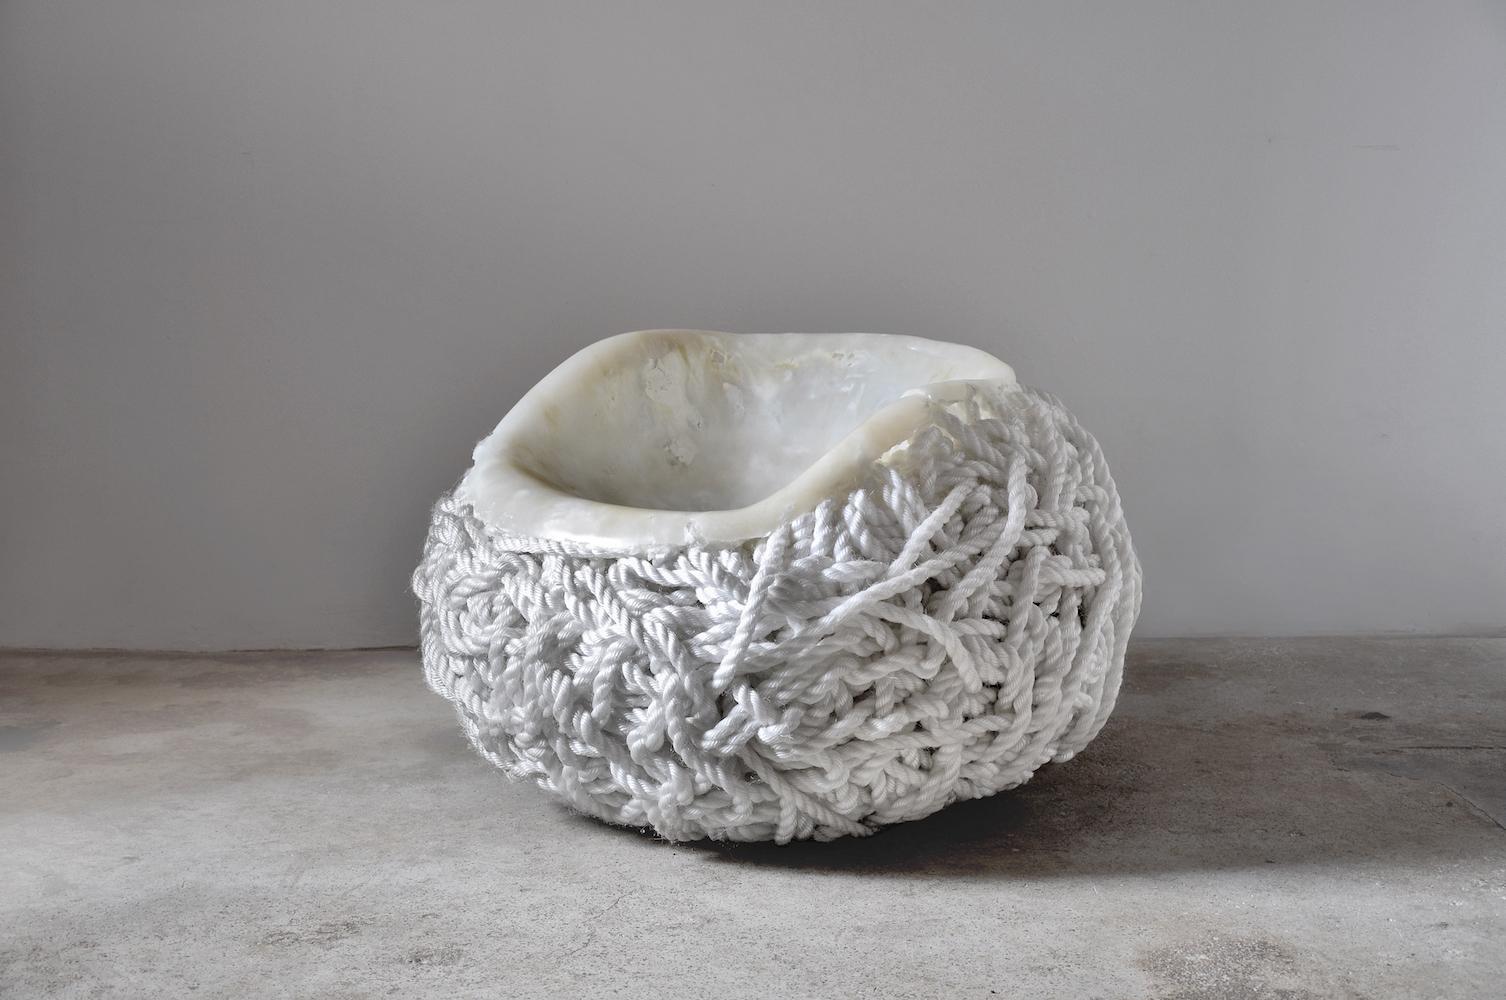 'Meltdown Chair, White Rope' is a piece by English artist Tom Price, from the Meltdown Series. This chair is made entirely from polypropylene rope, no other material is added. The artist starts its creation by rolling up the rope around a ball –